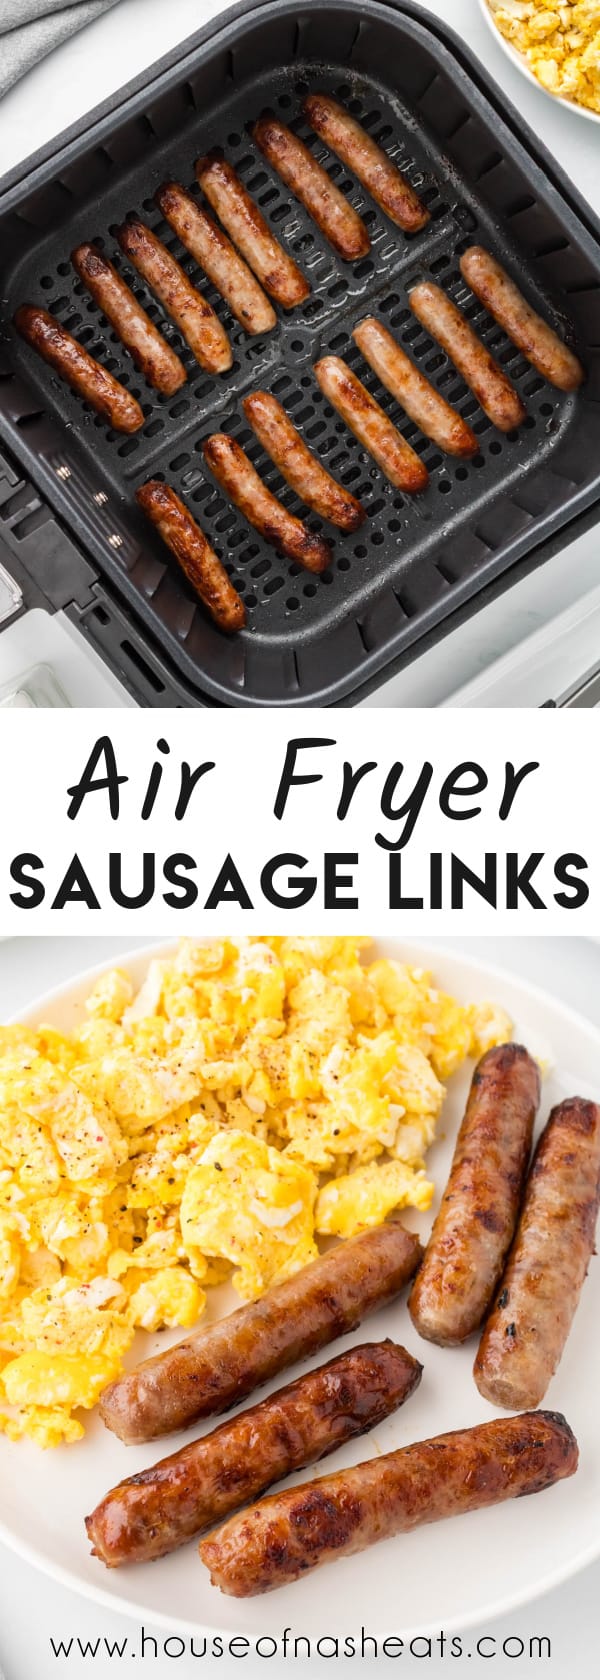 A collage of images of air fryer sausage links with text overlay.